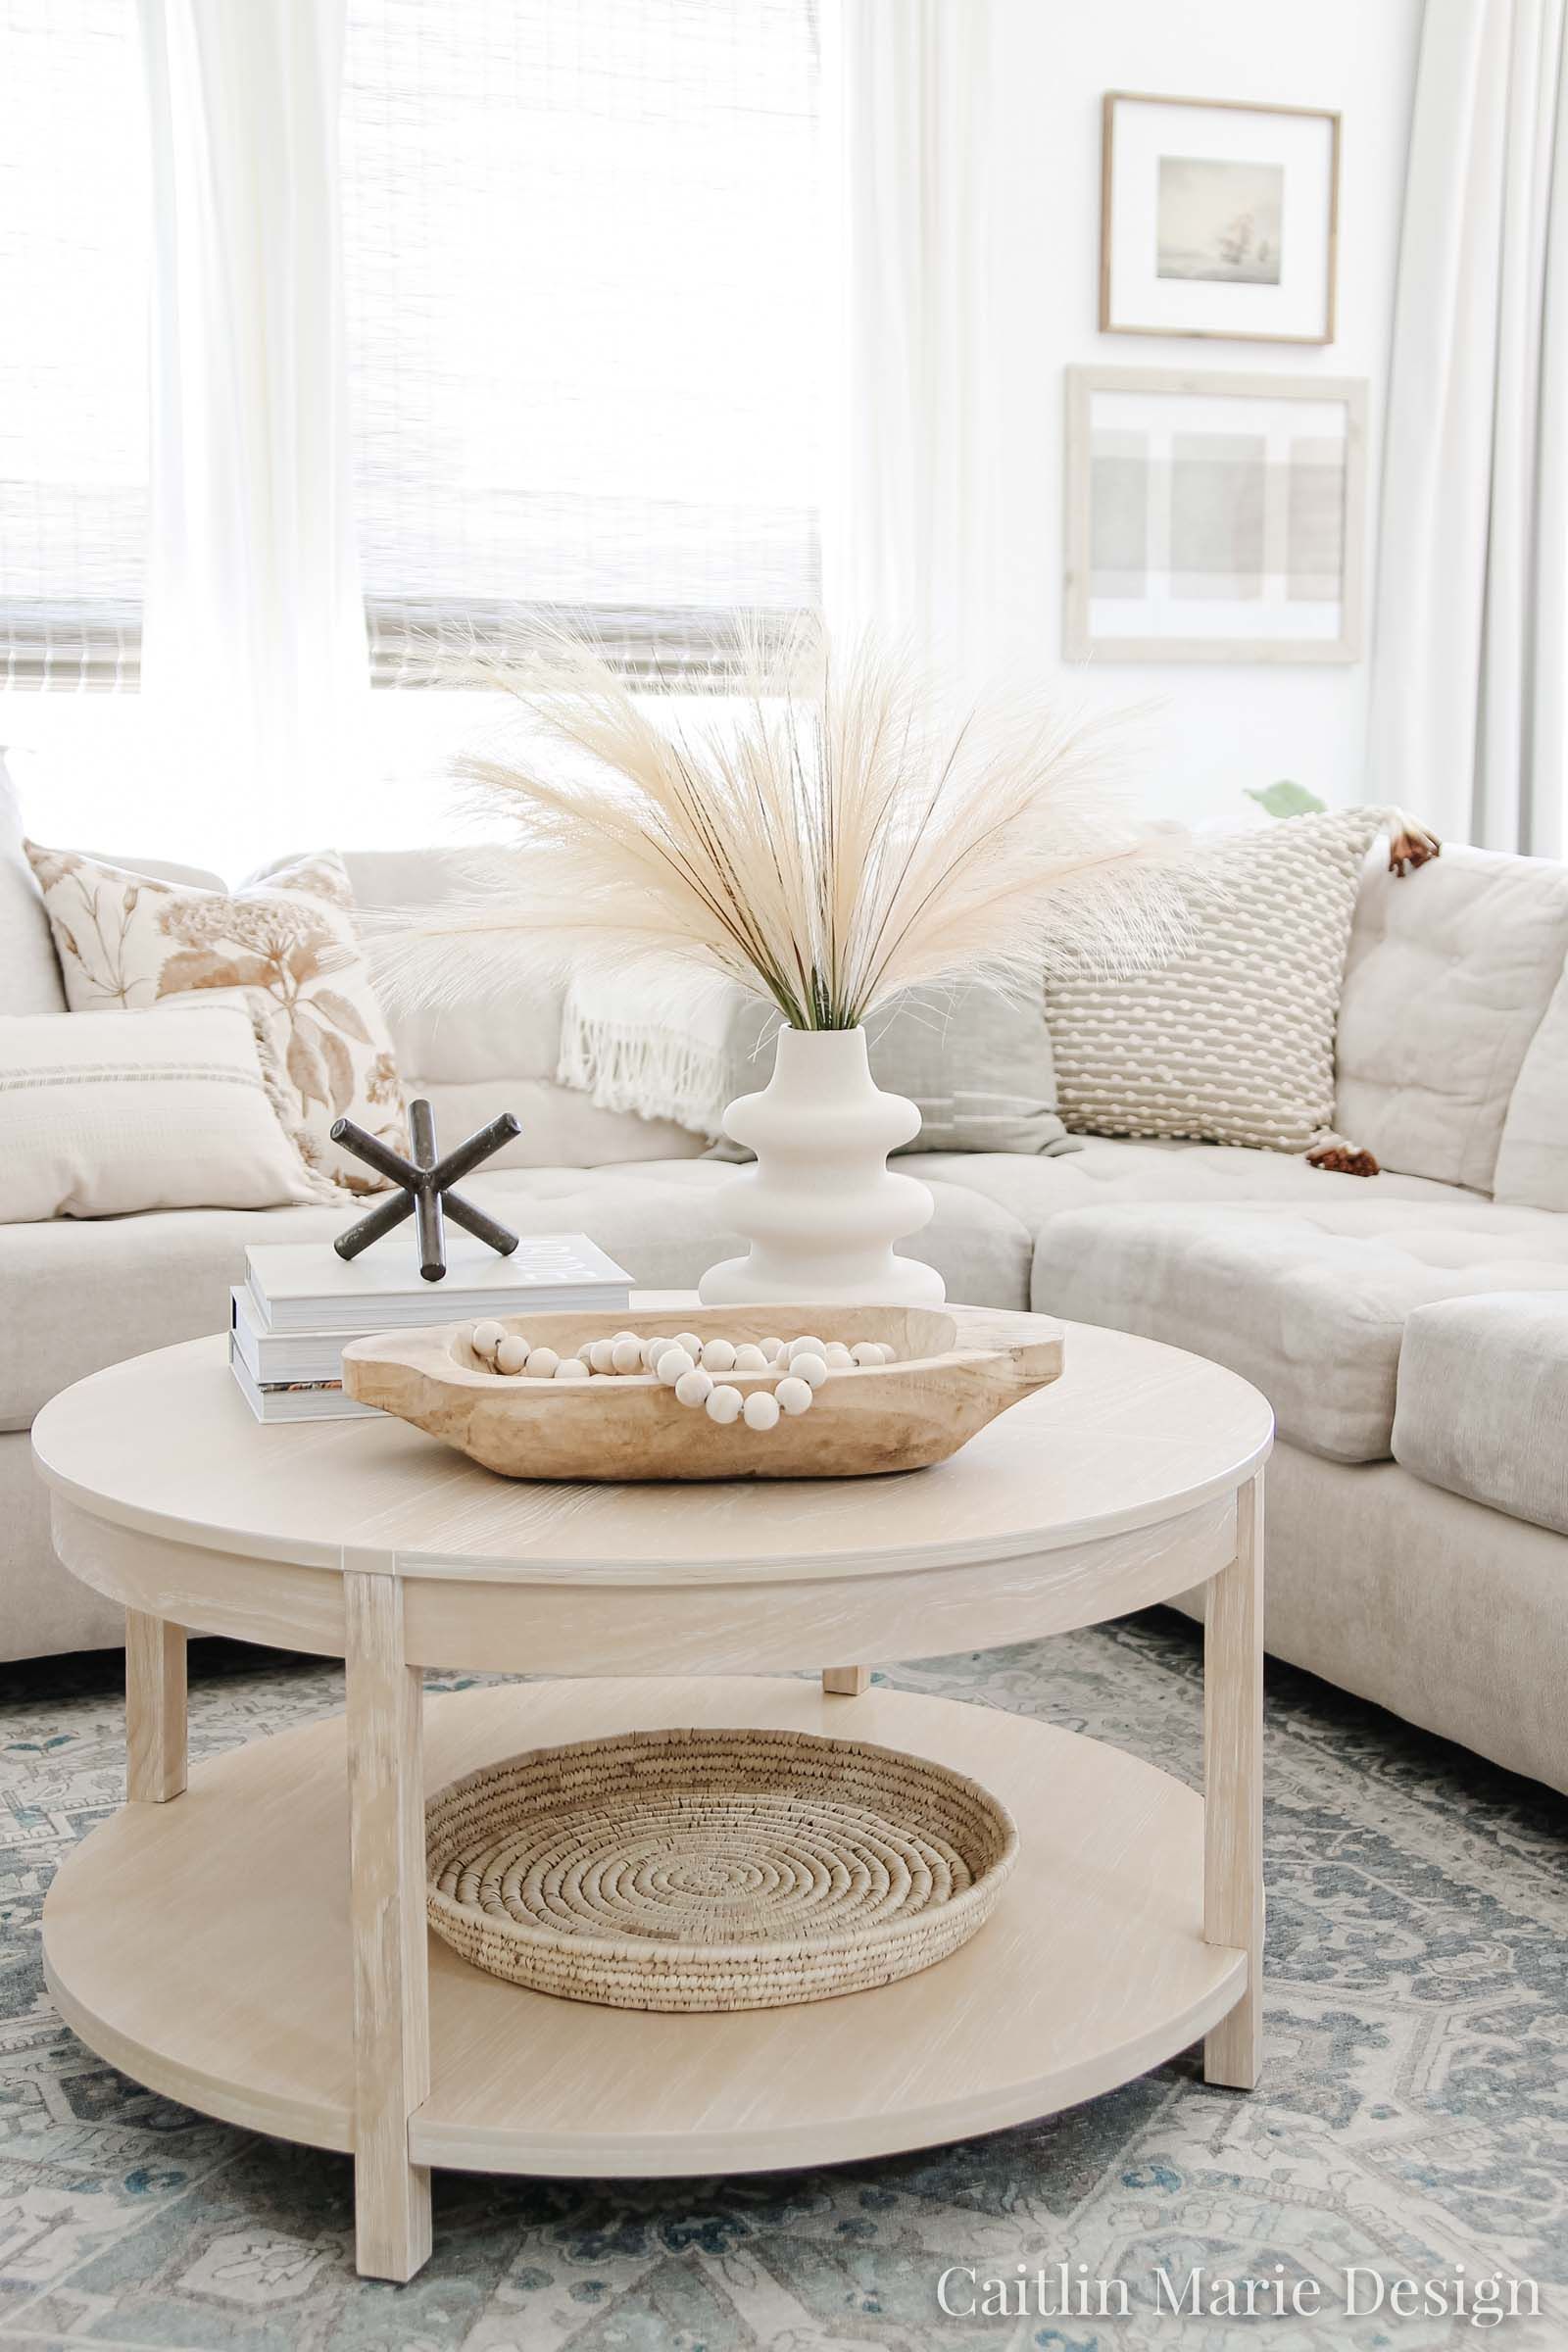 15+ Round Coffee Tables For Any Budget | The Coastal Oak Inside Circular Coffee Tables (View 18 of 20)